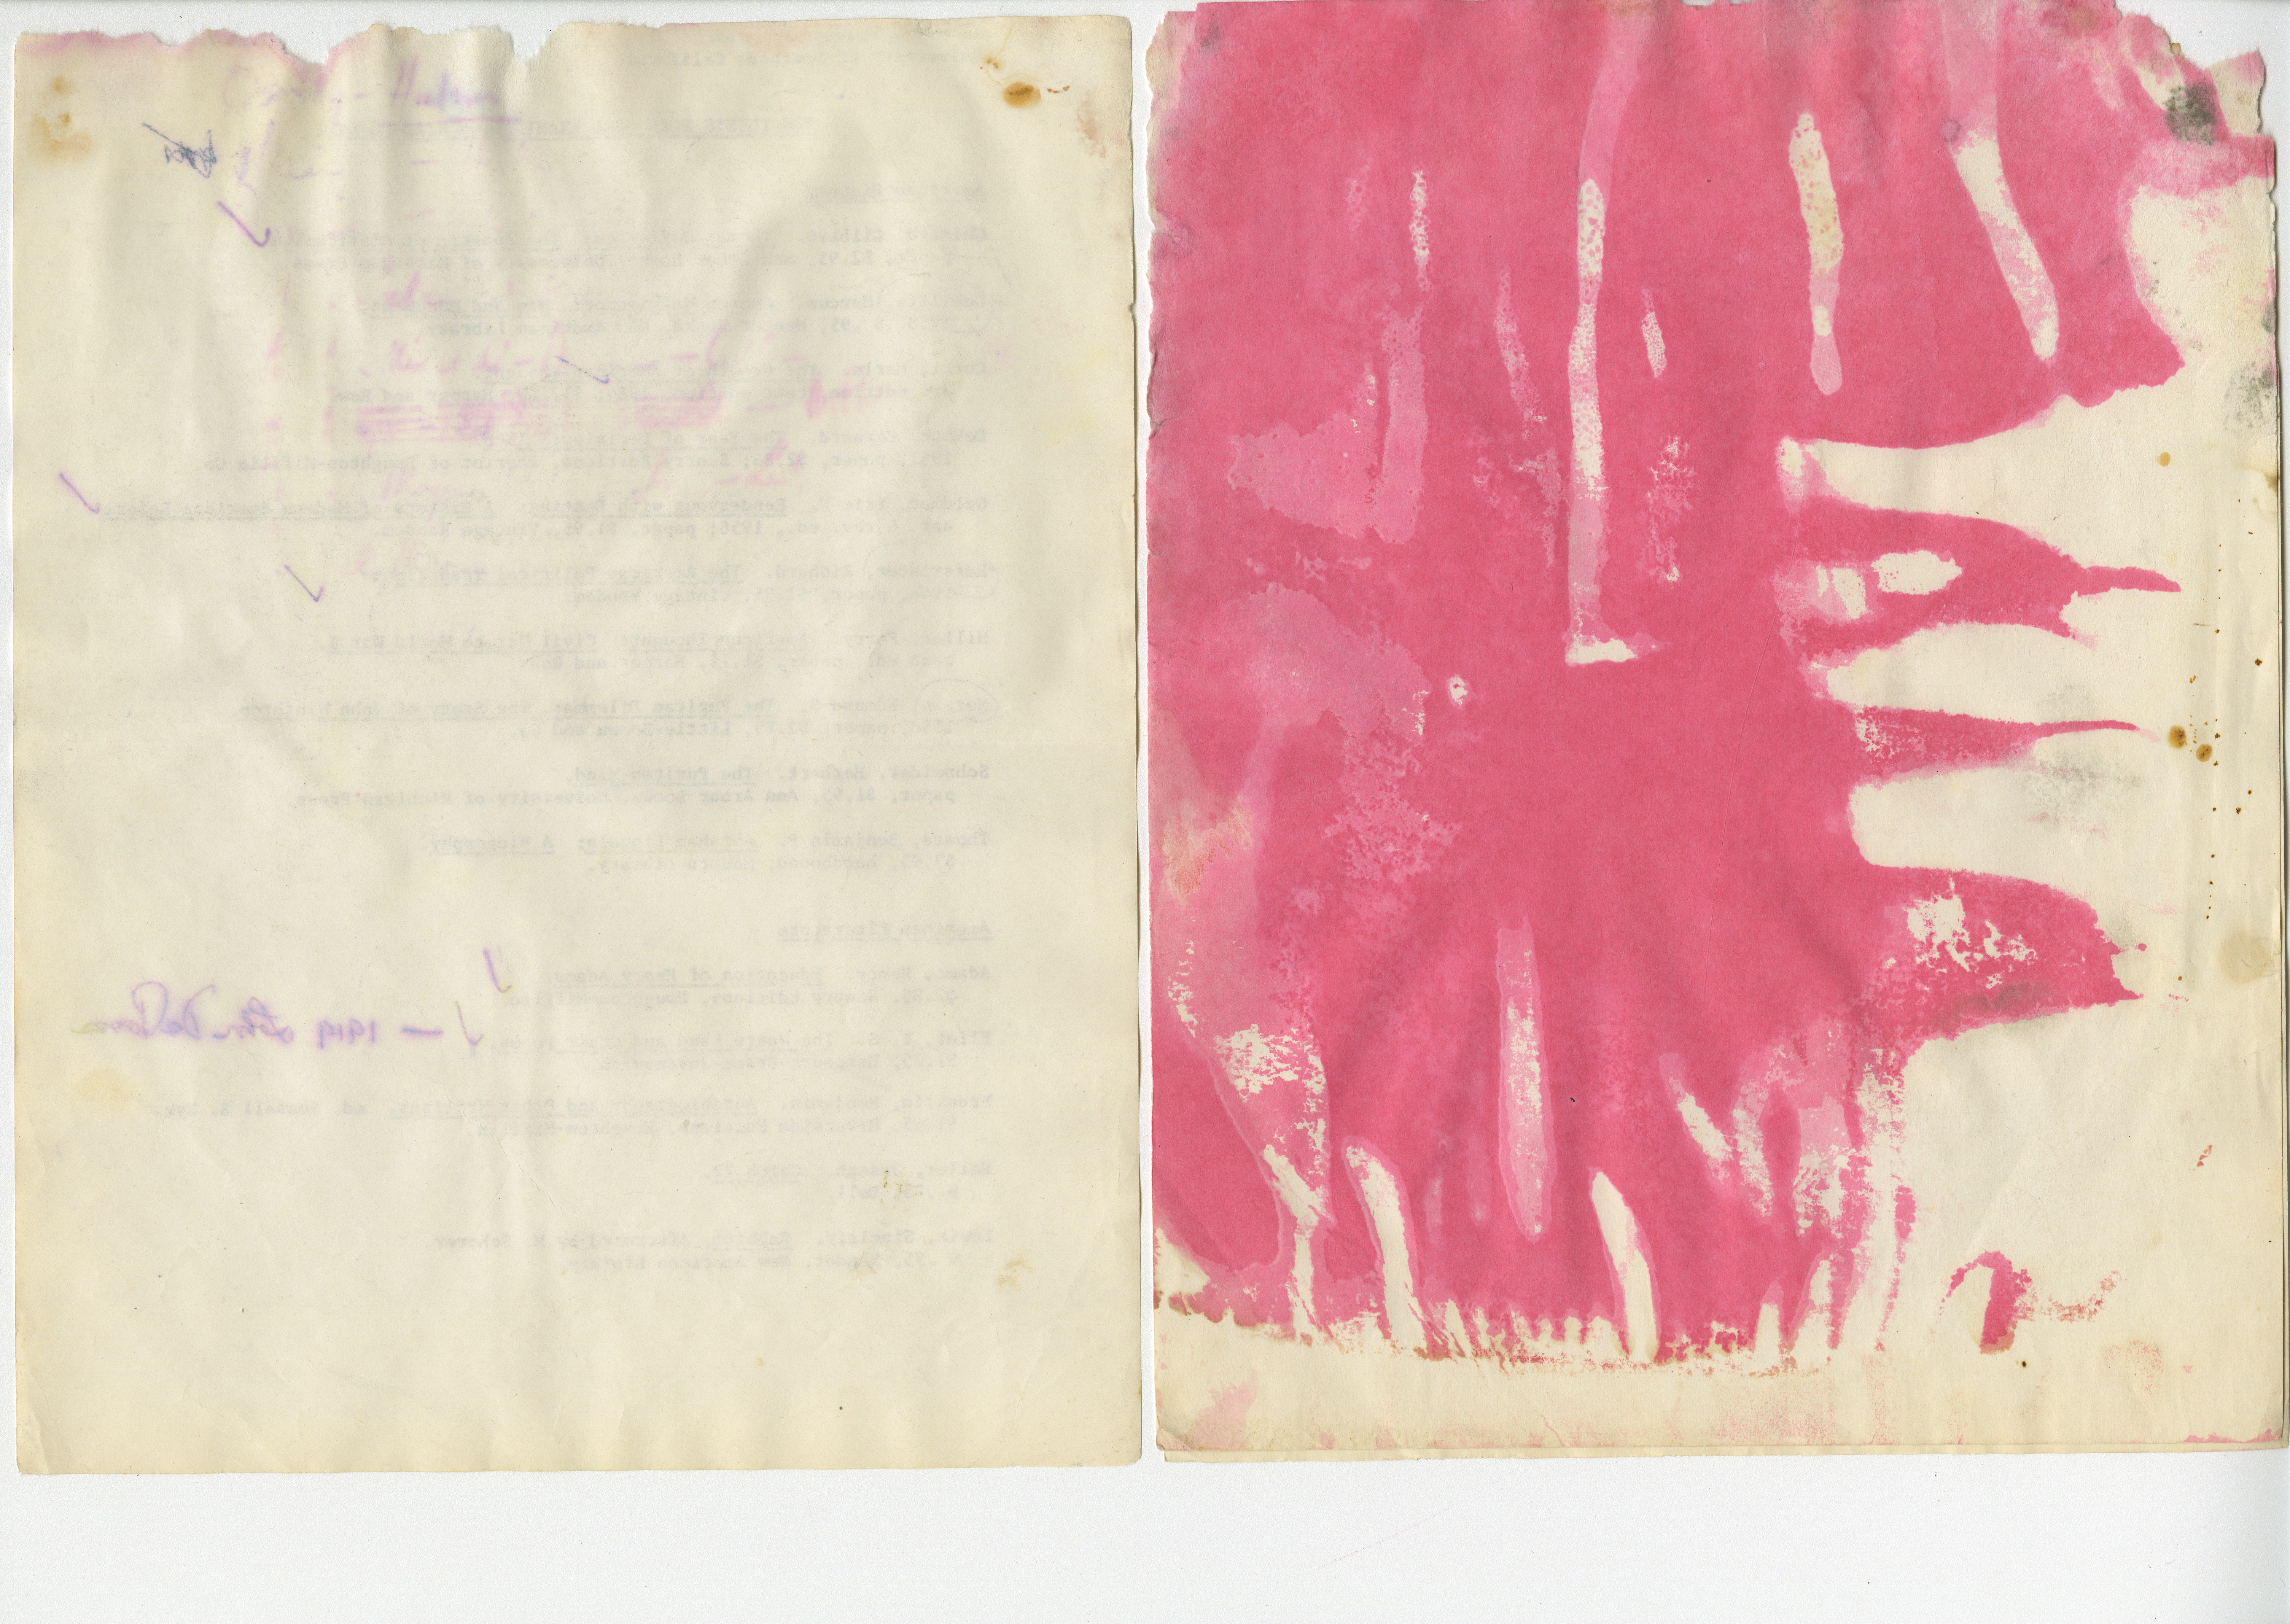 Scan of materials from Ntozake Shange's papers by Kiani Ned.